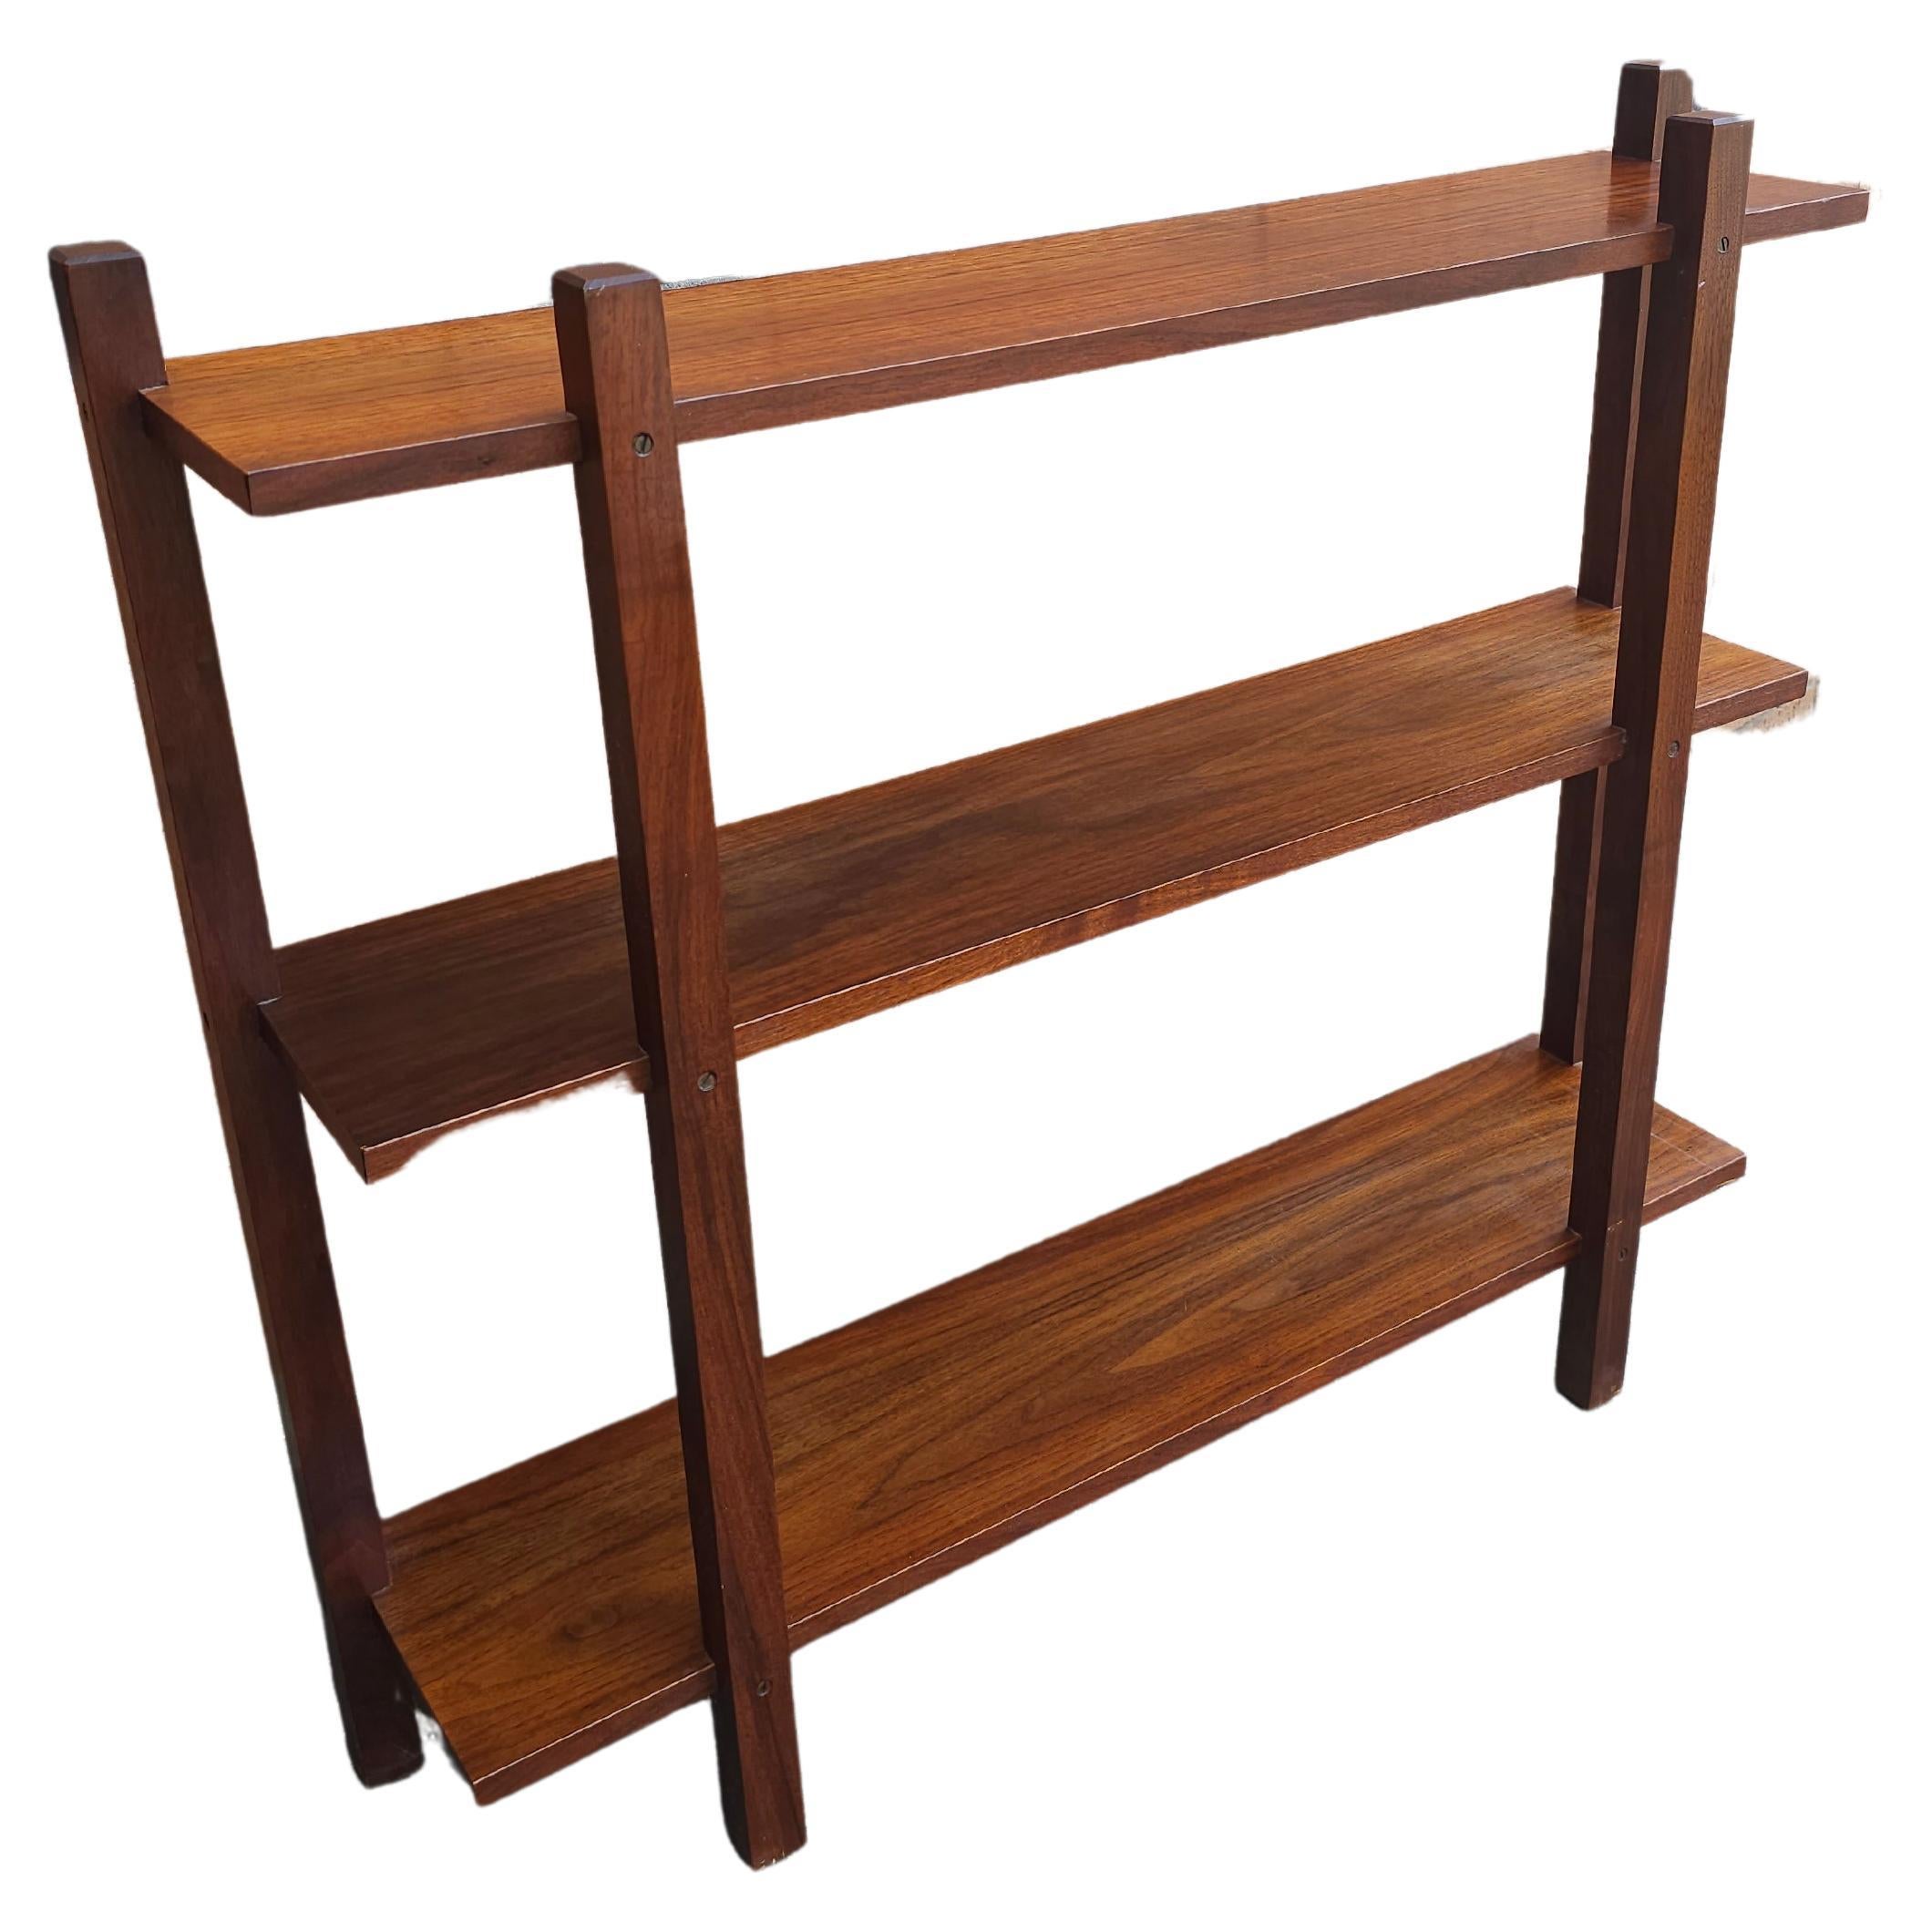 20th Century American Arts and Crafts Solid Mahogany Open Bookcase Etagere In Good Condition For Sale In Germantown, MD